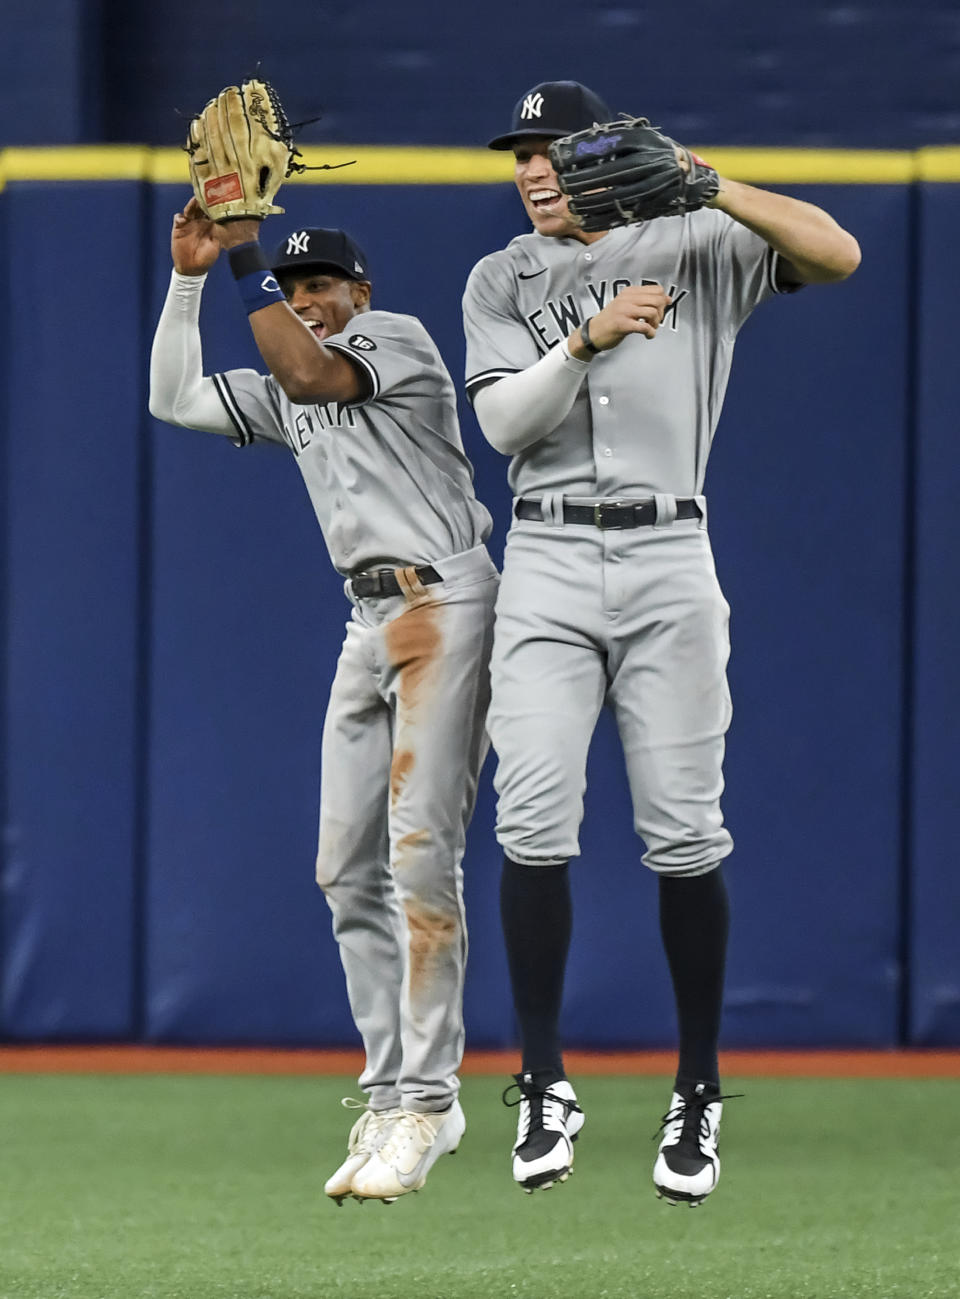 New York Yankees outfielders Greg Allen, left, and Aaron Judge celebrate the team's 4-3 win over the Tampa Bay Rays in a baseball game Tuesday, July 27, 2021, in St. Petersburg, Fla. (AP Photo/Steve Nesius)